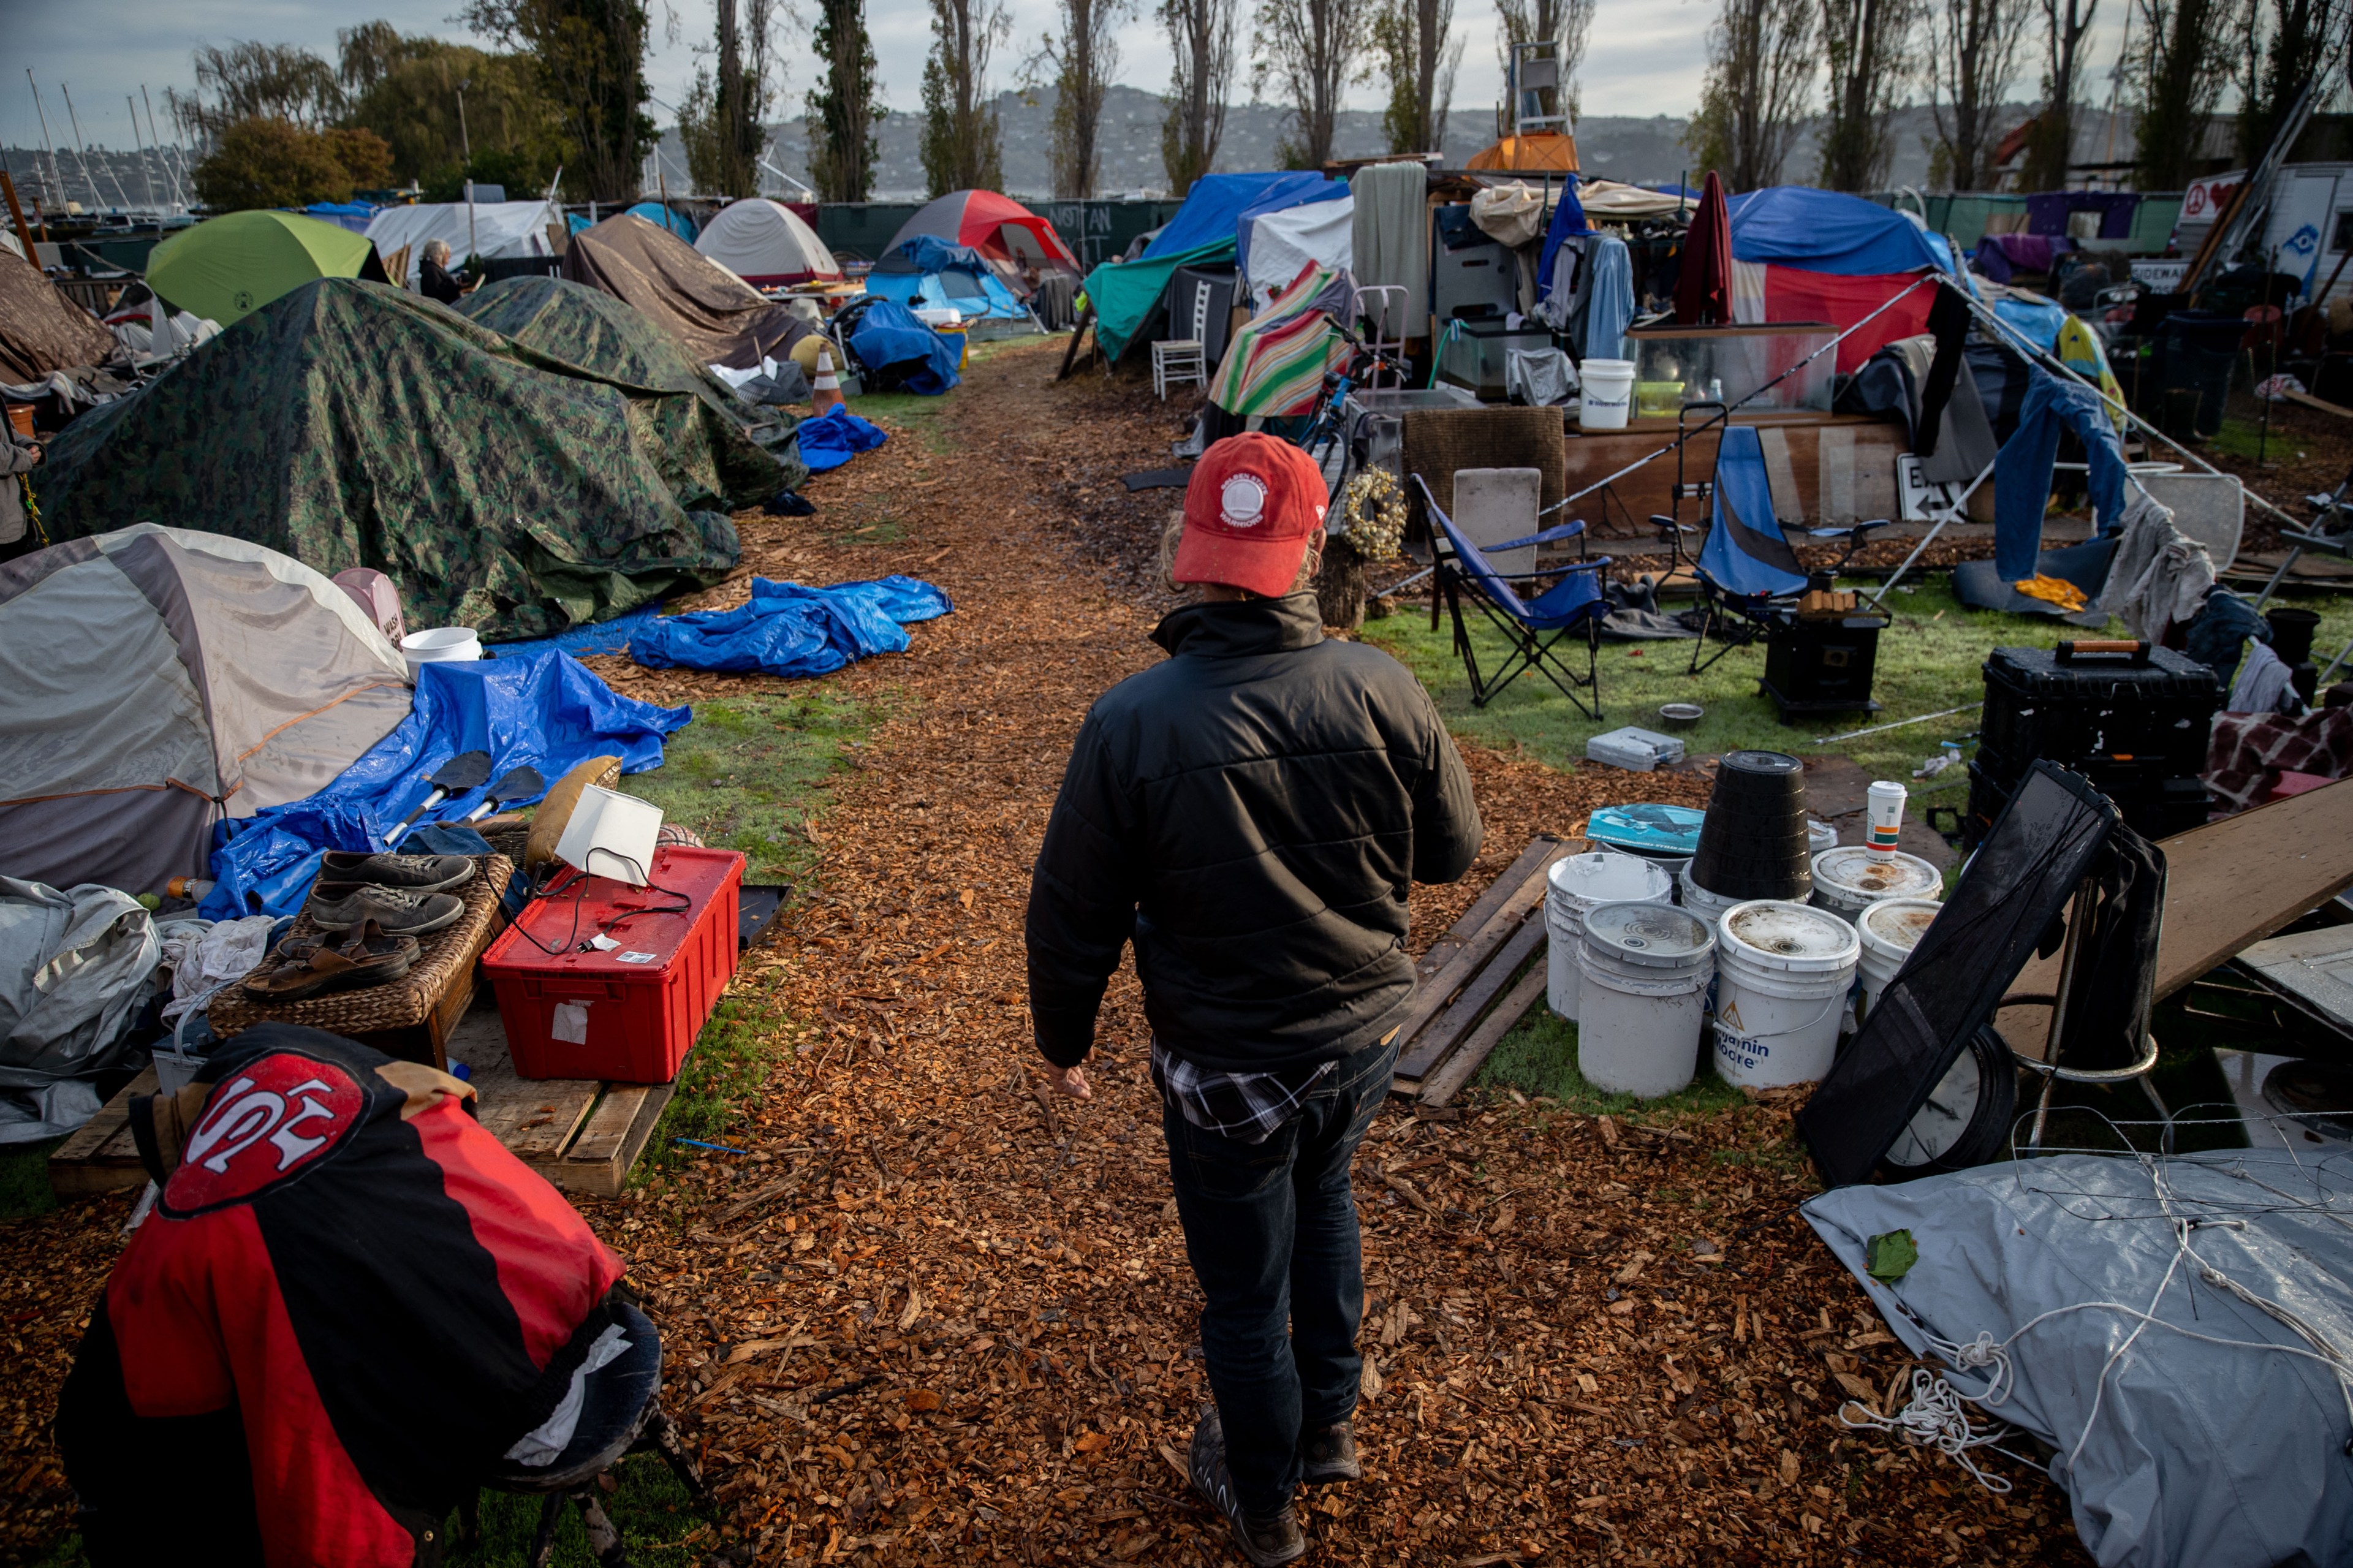 A person wearing a red cap and black jacket walks on a path through a crowded campsite with numerous tents, tarps, and scattered belongings on a grassy field.